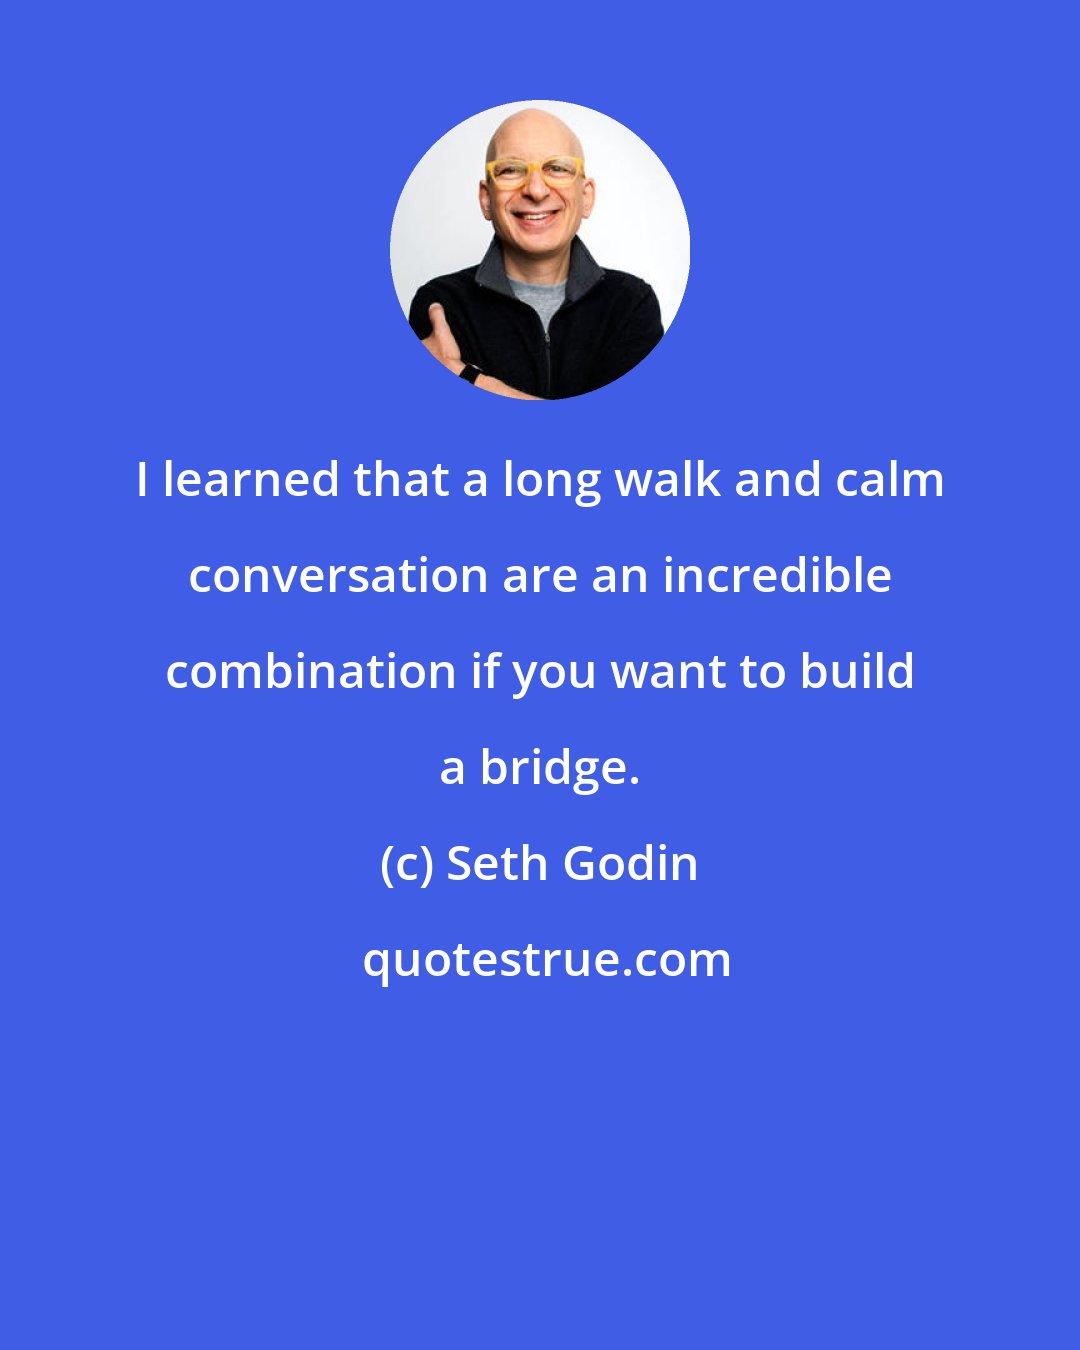 Seth Godin: I learned that a long walk and calm conversation are an incredible combination if you want to build a bridge.